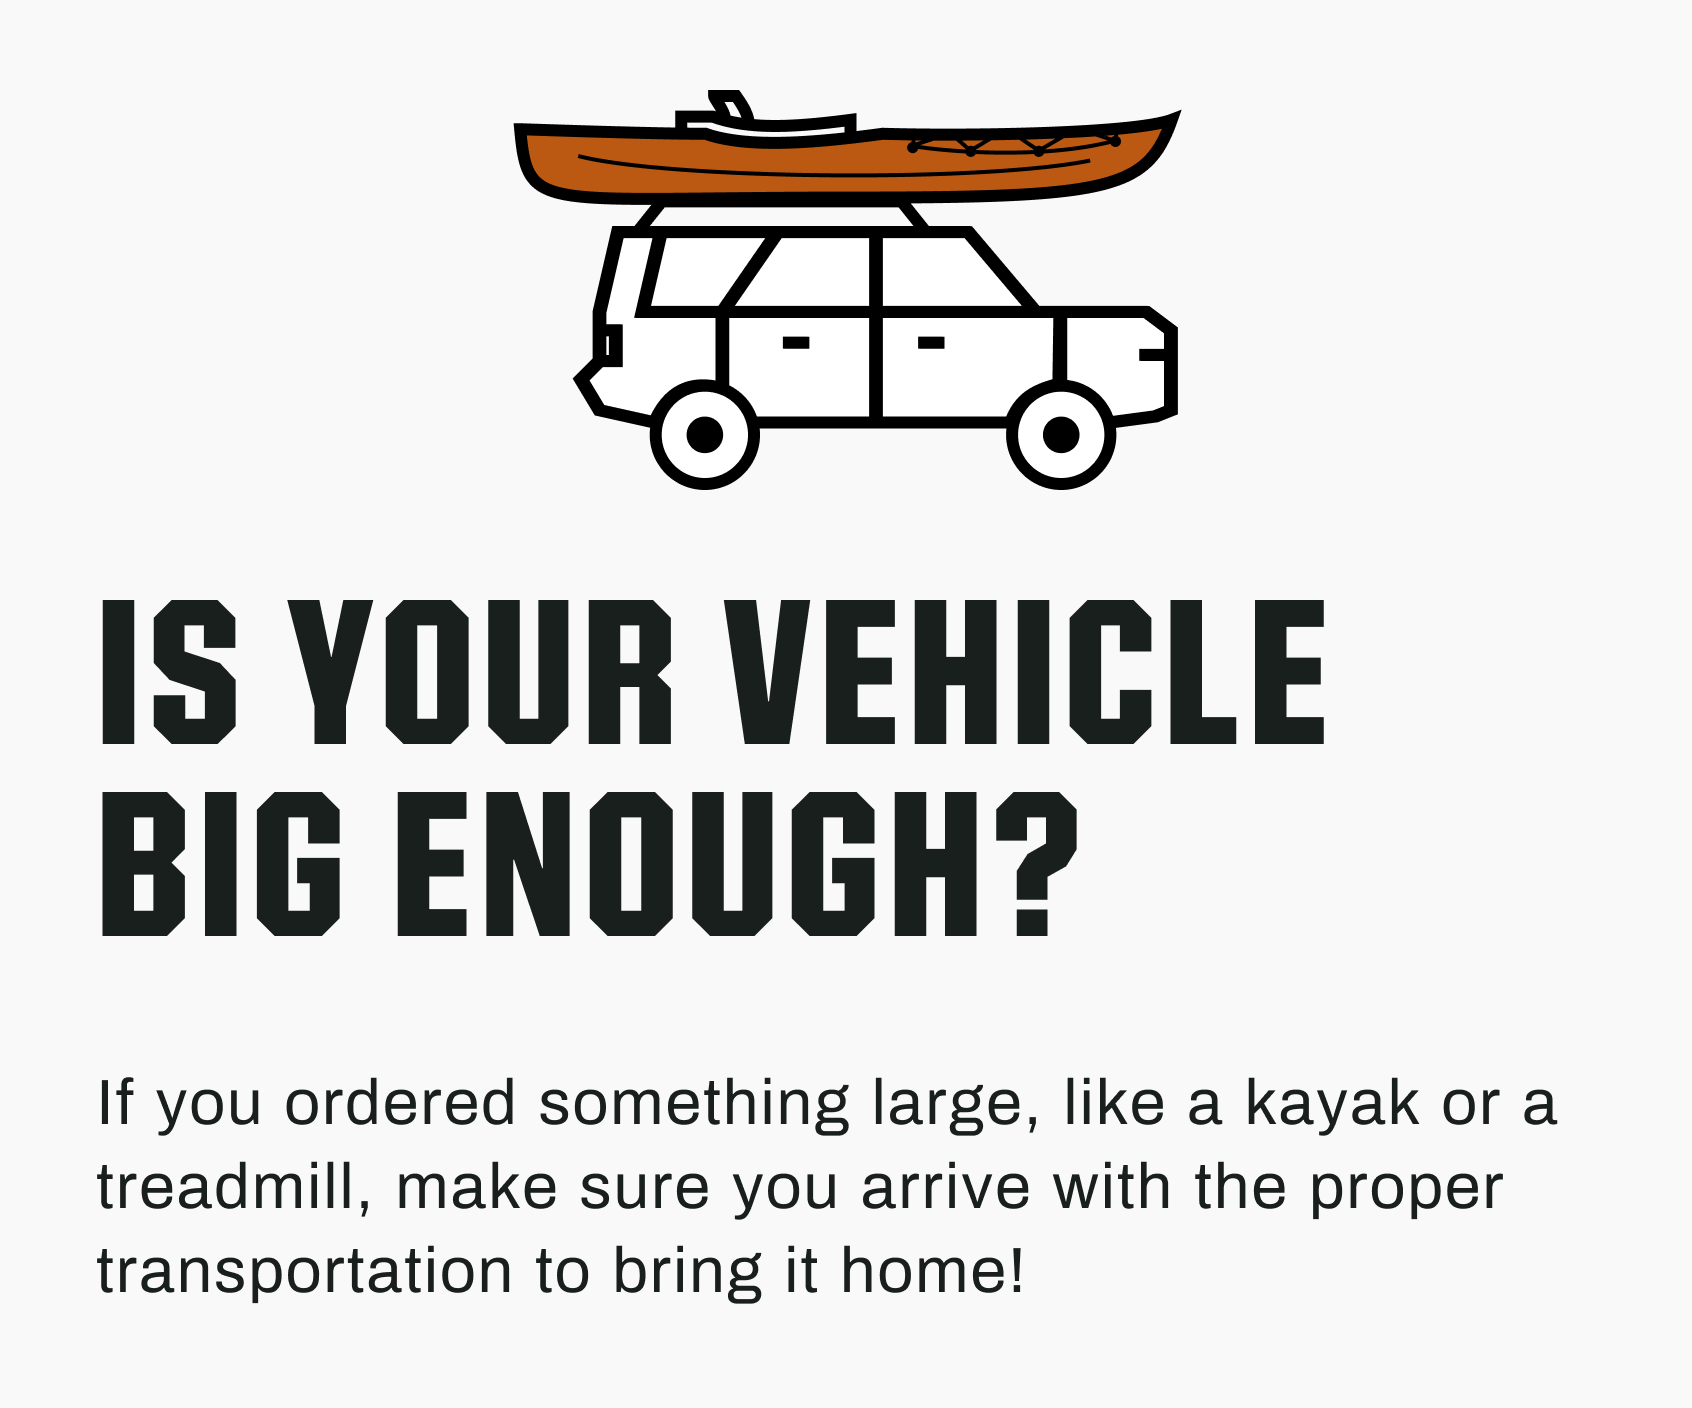 Is your vehicle Big enough? If you ordered something large, like a kayak or a treadmill, make sure you arrive with the proper transportation to bring it home!